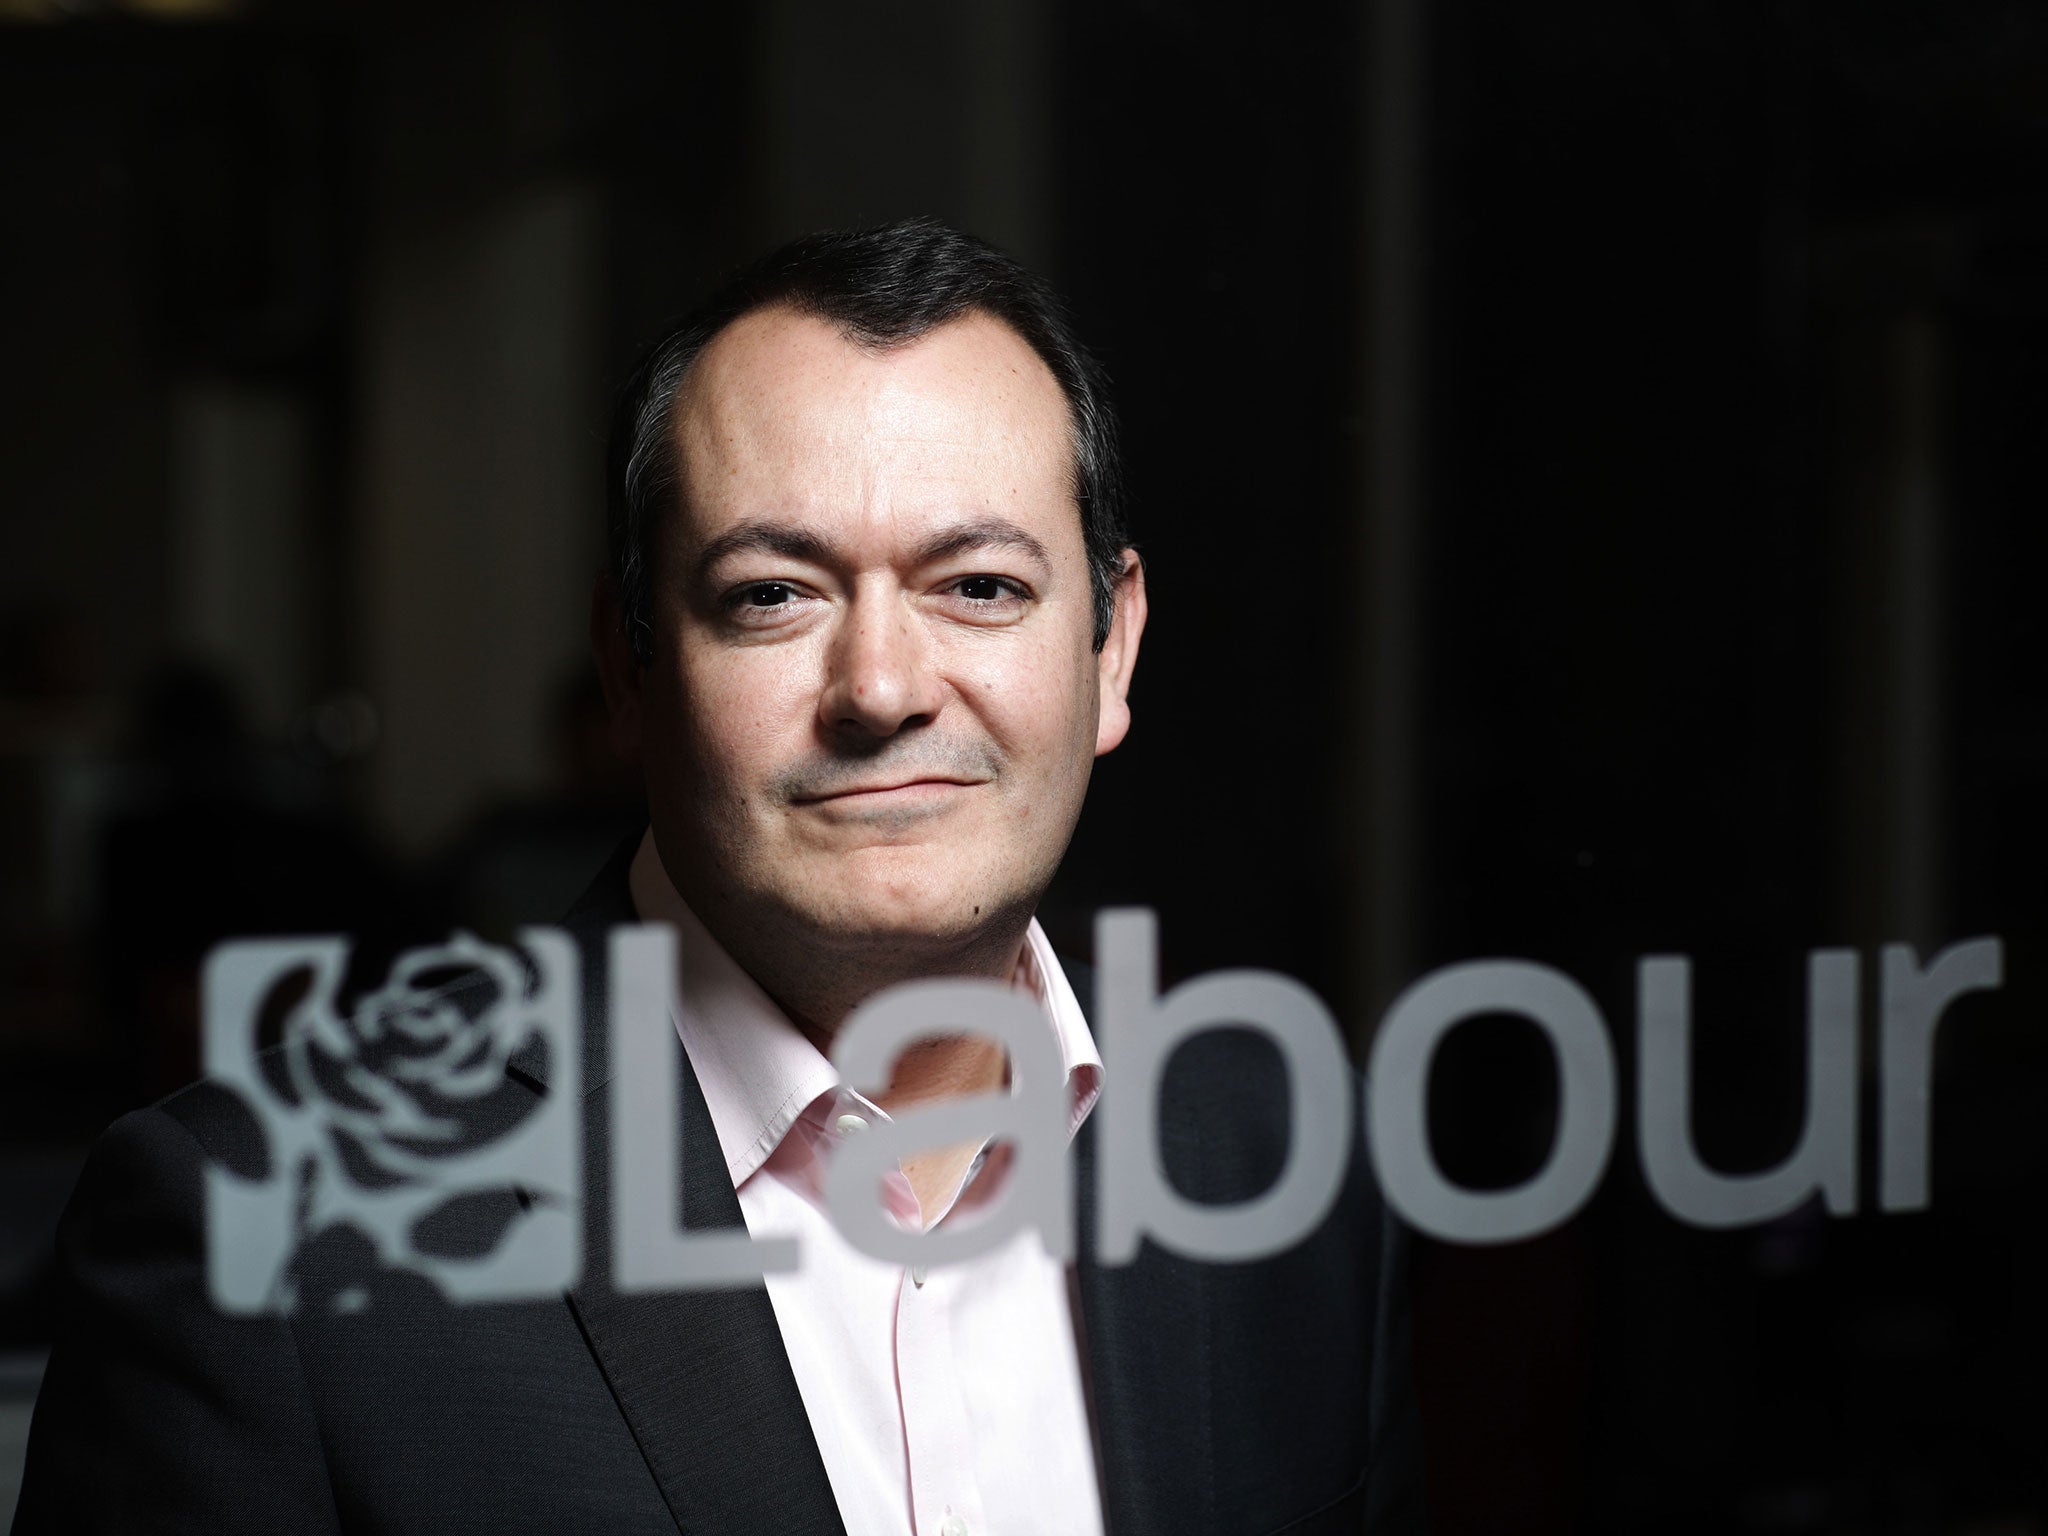 served Michael Dugher served as vice chairman of the party under Ed Miliband between 2011 and 2014.